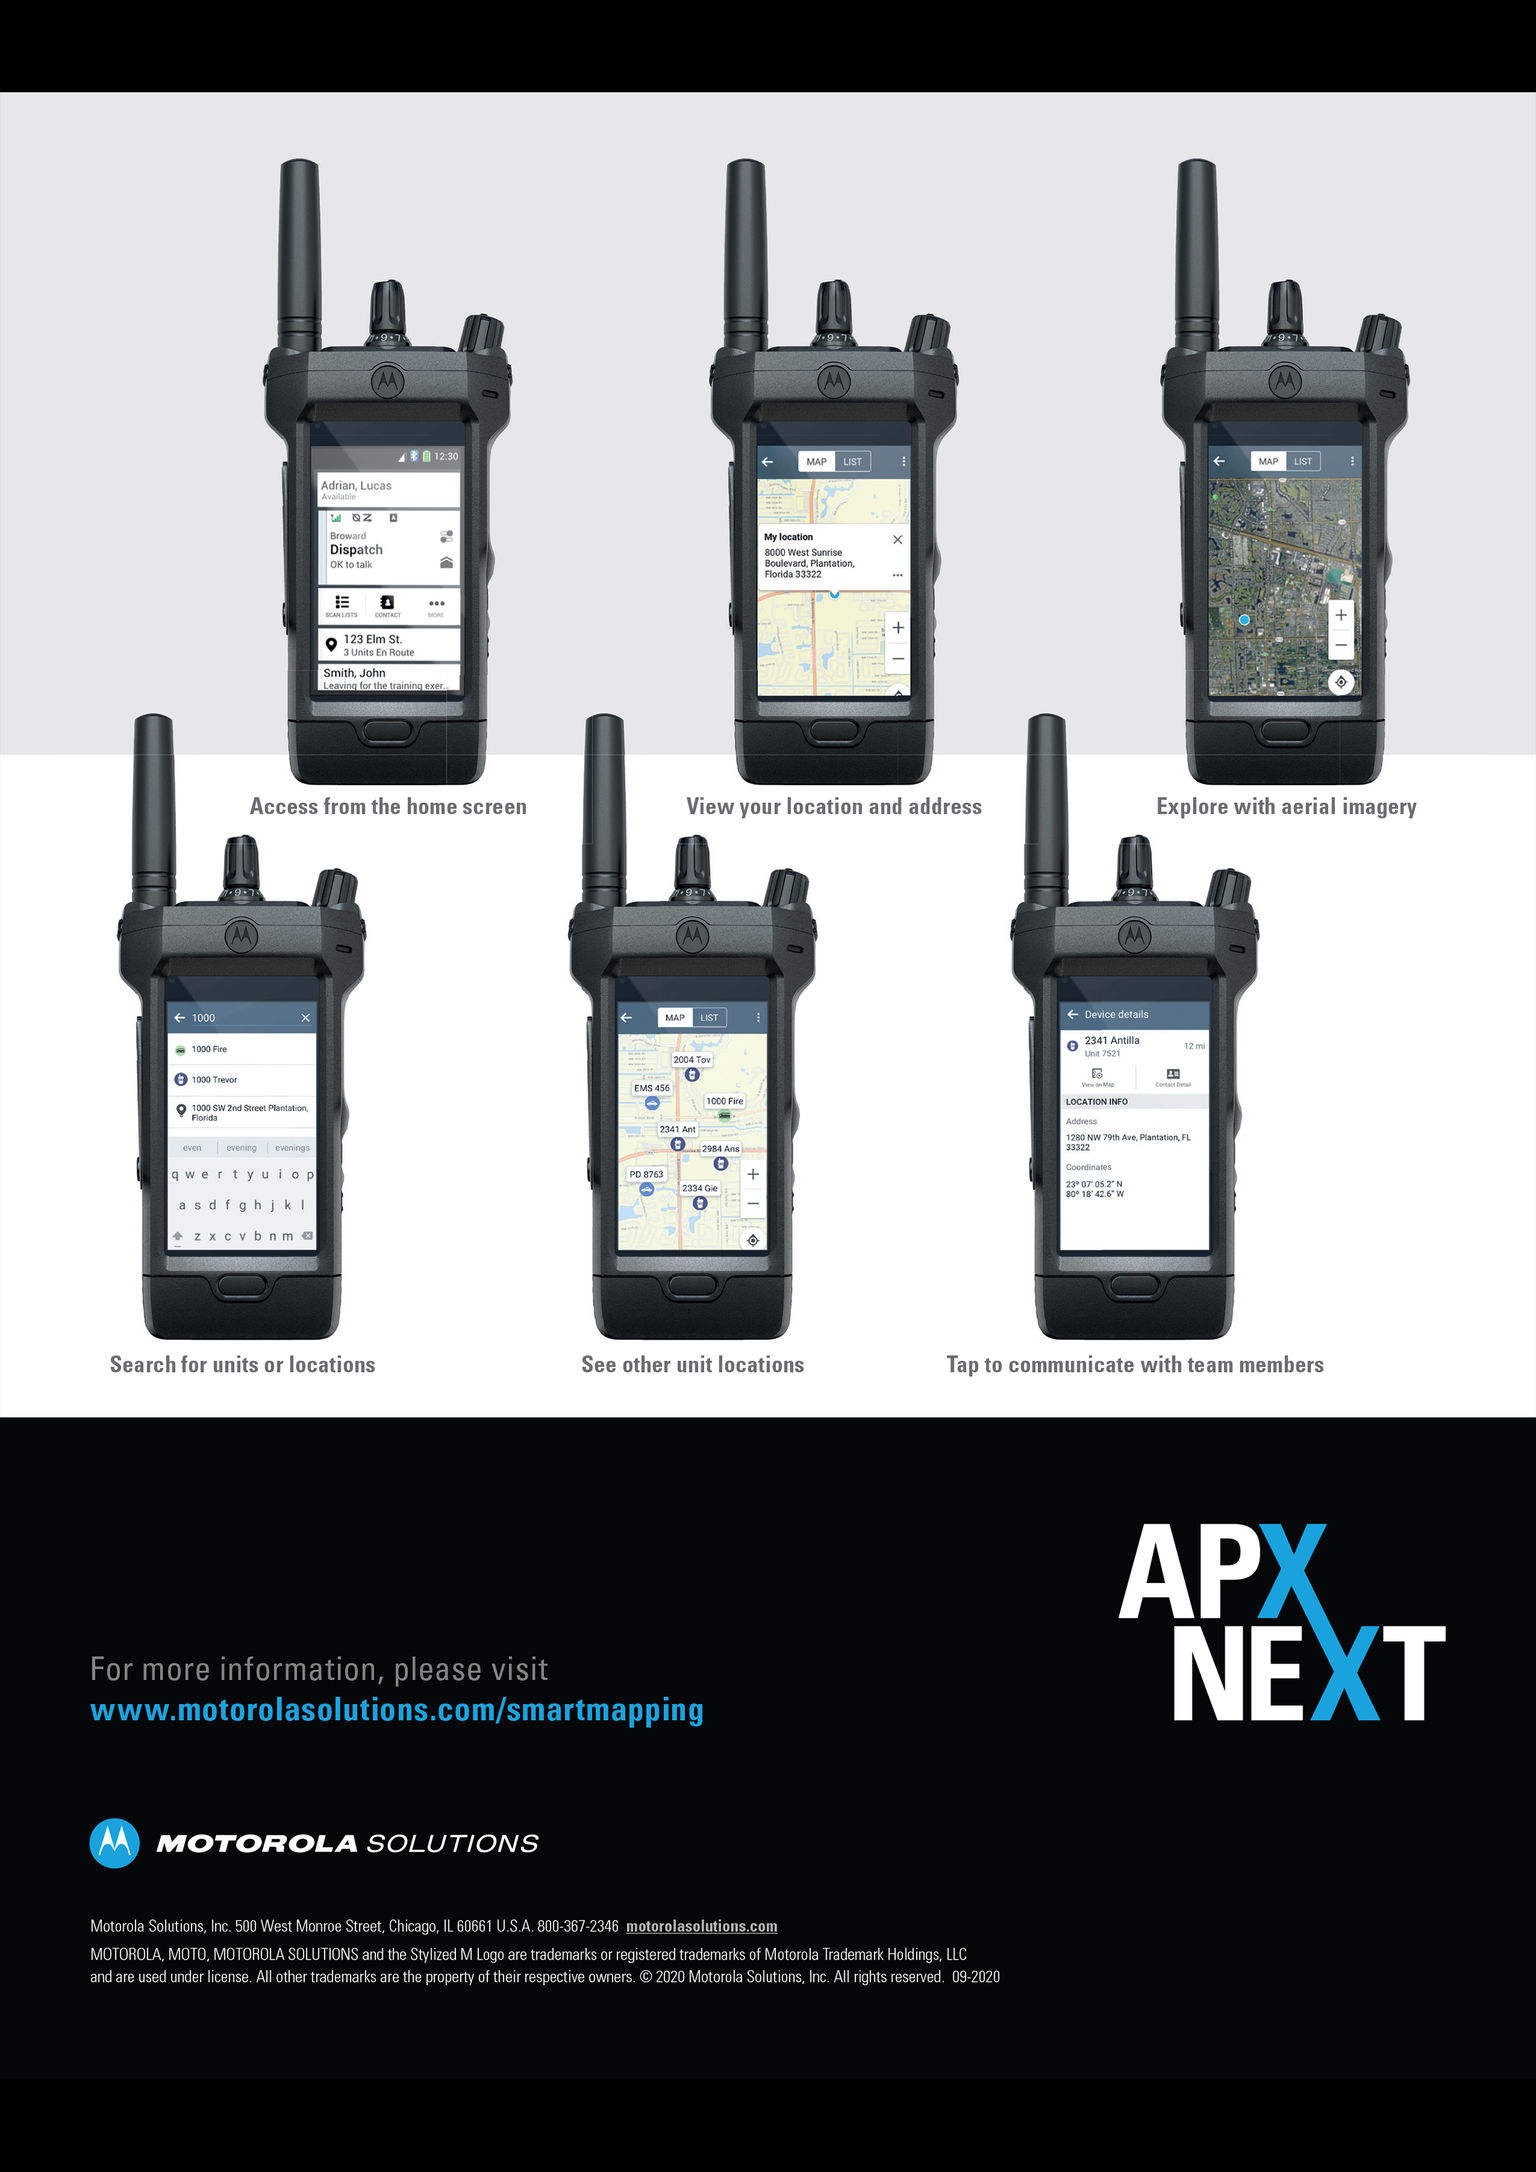 APX NEXT Smart-messaging and Smart-mapping